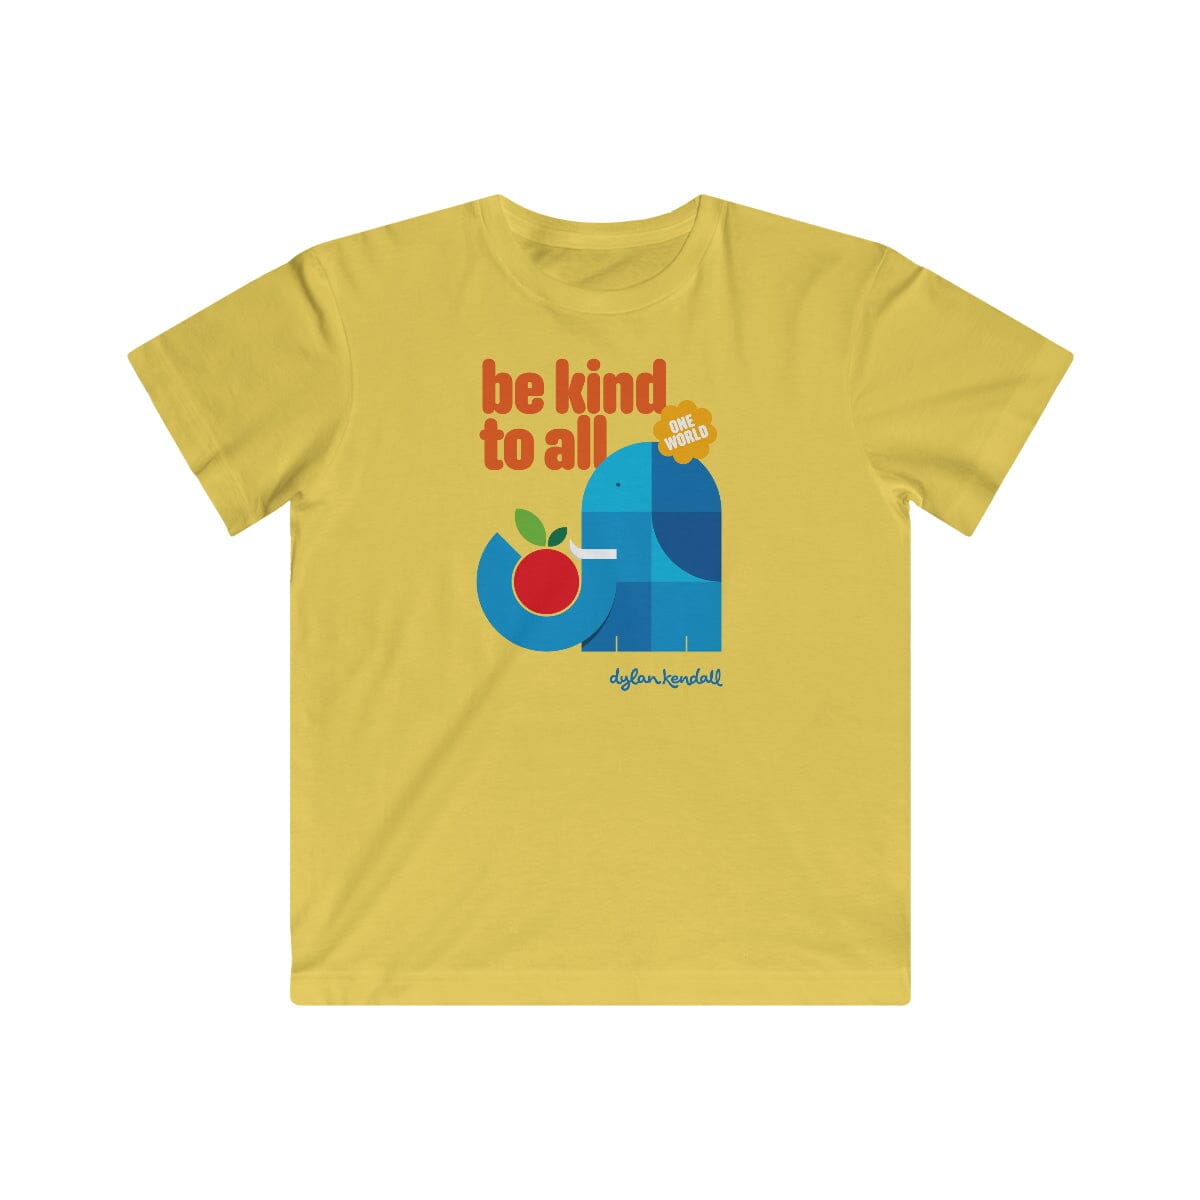 All! T-Shirt | Be To Kids Kind